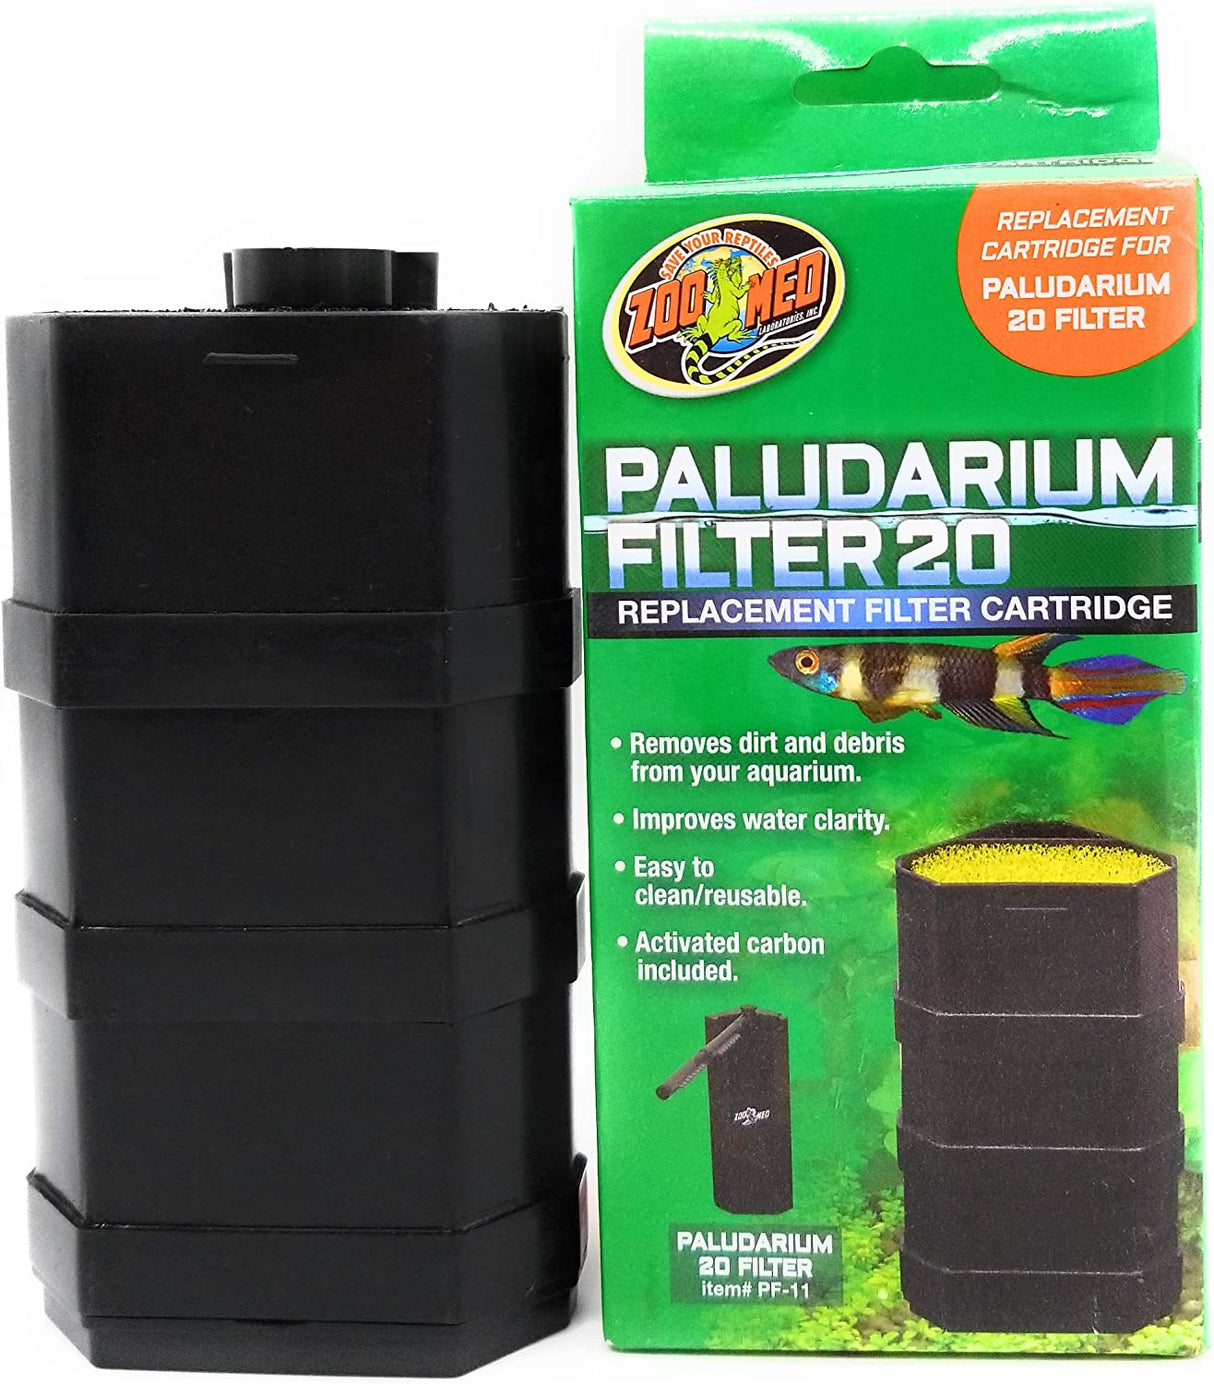 6 count (6 x 1 ct) Zoo Med Paludarium 20 Replacement Filter Cartridge